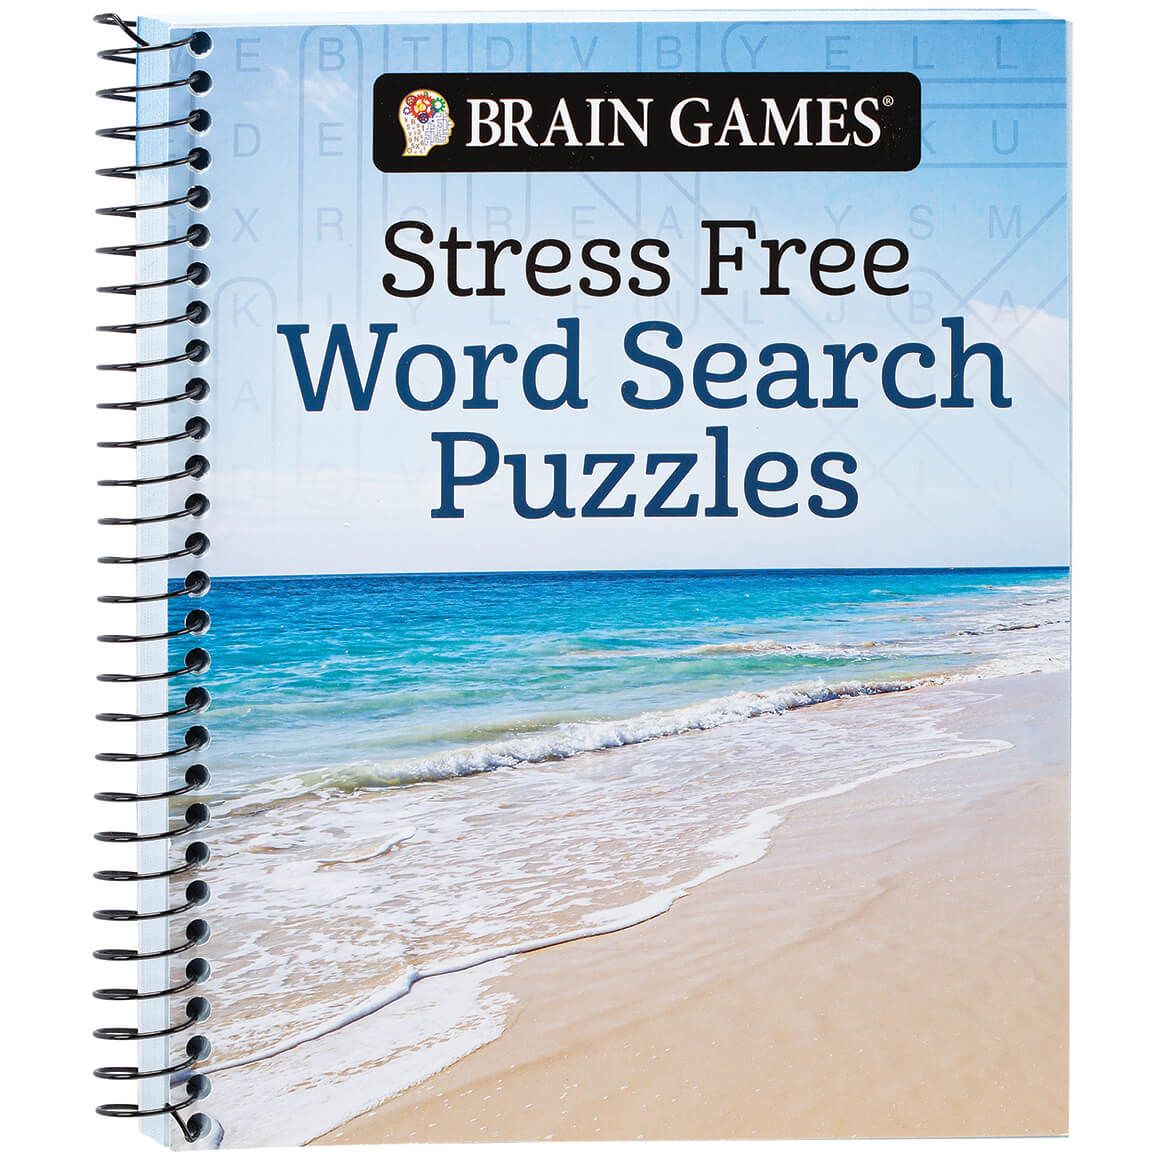 Brain Games® Stress Free Word Search Puzzles + '-' + 375535